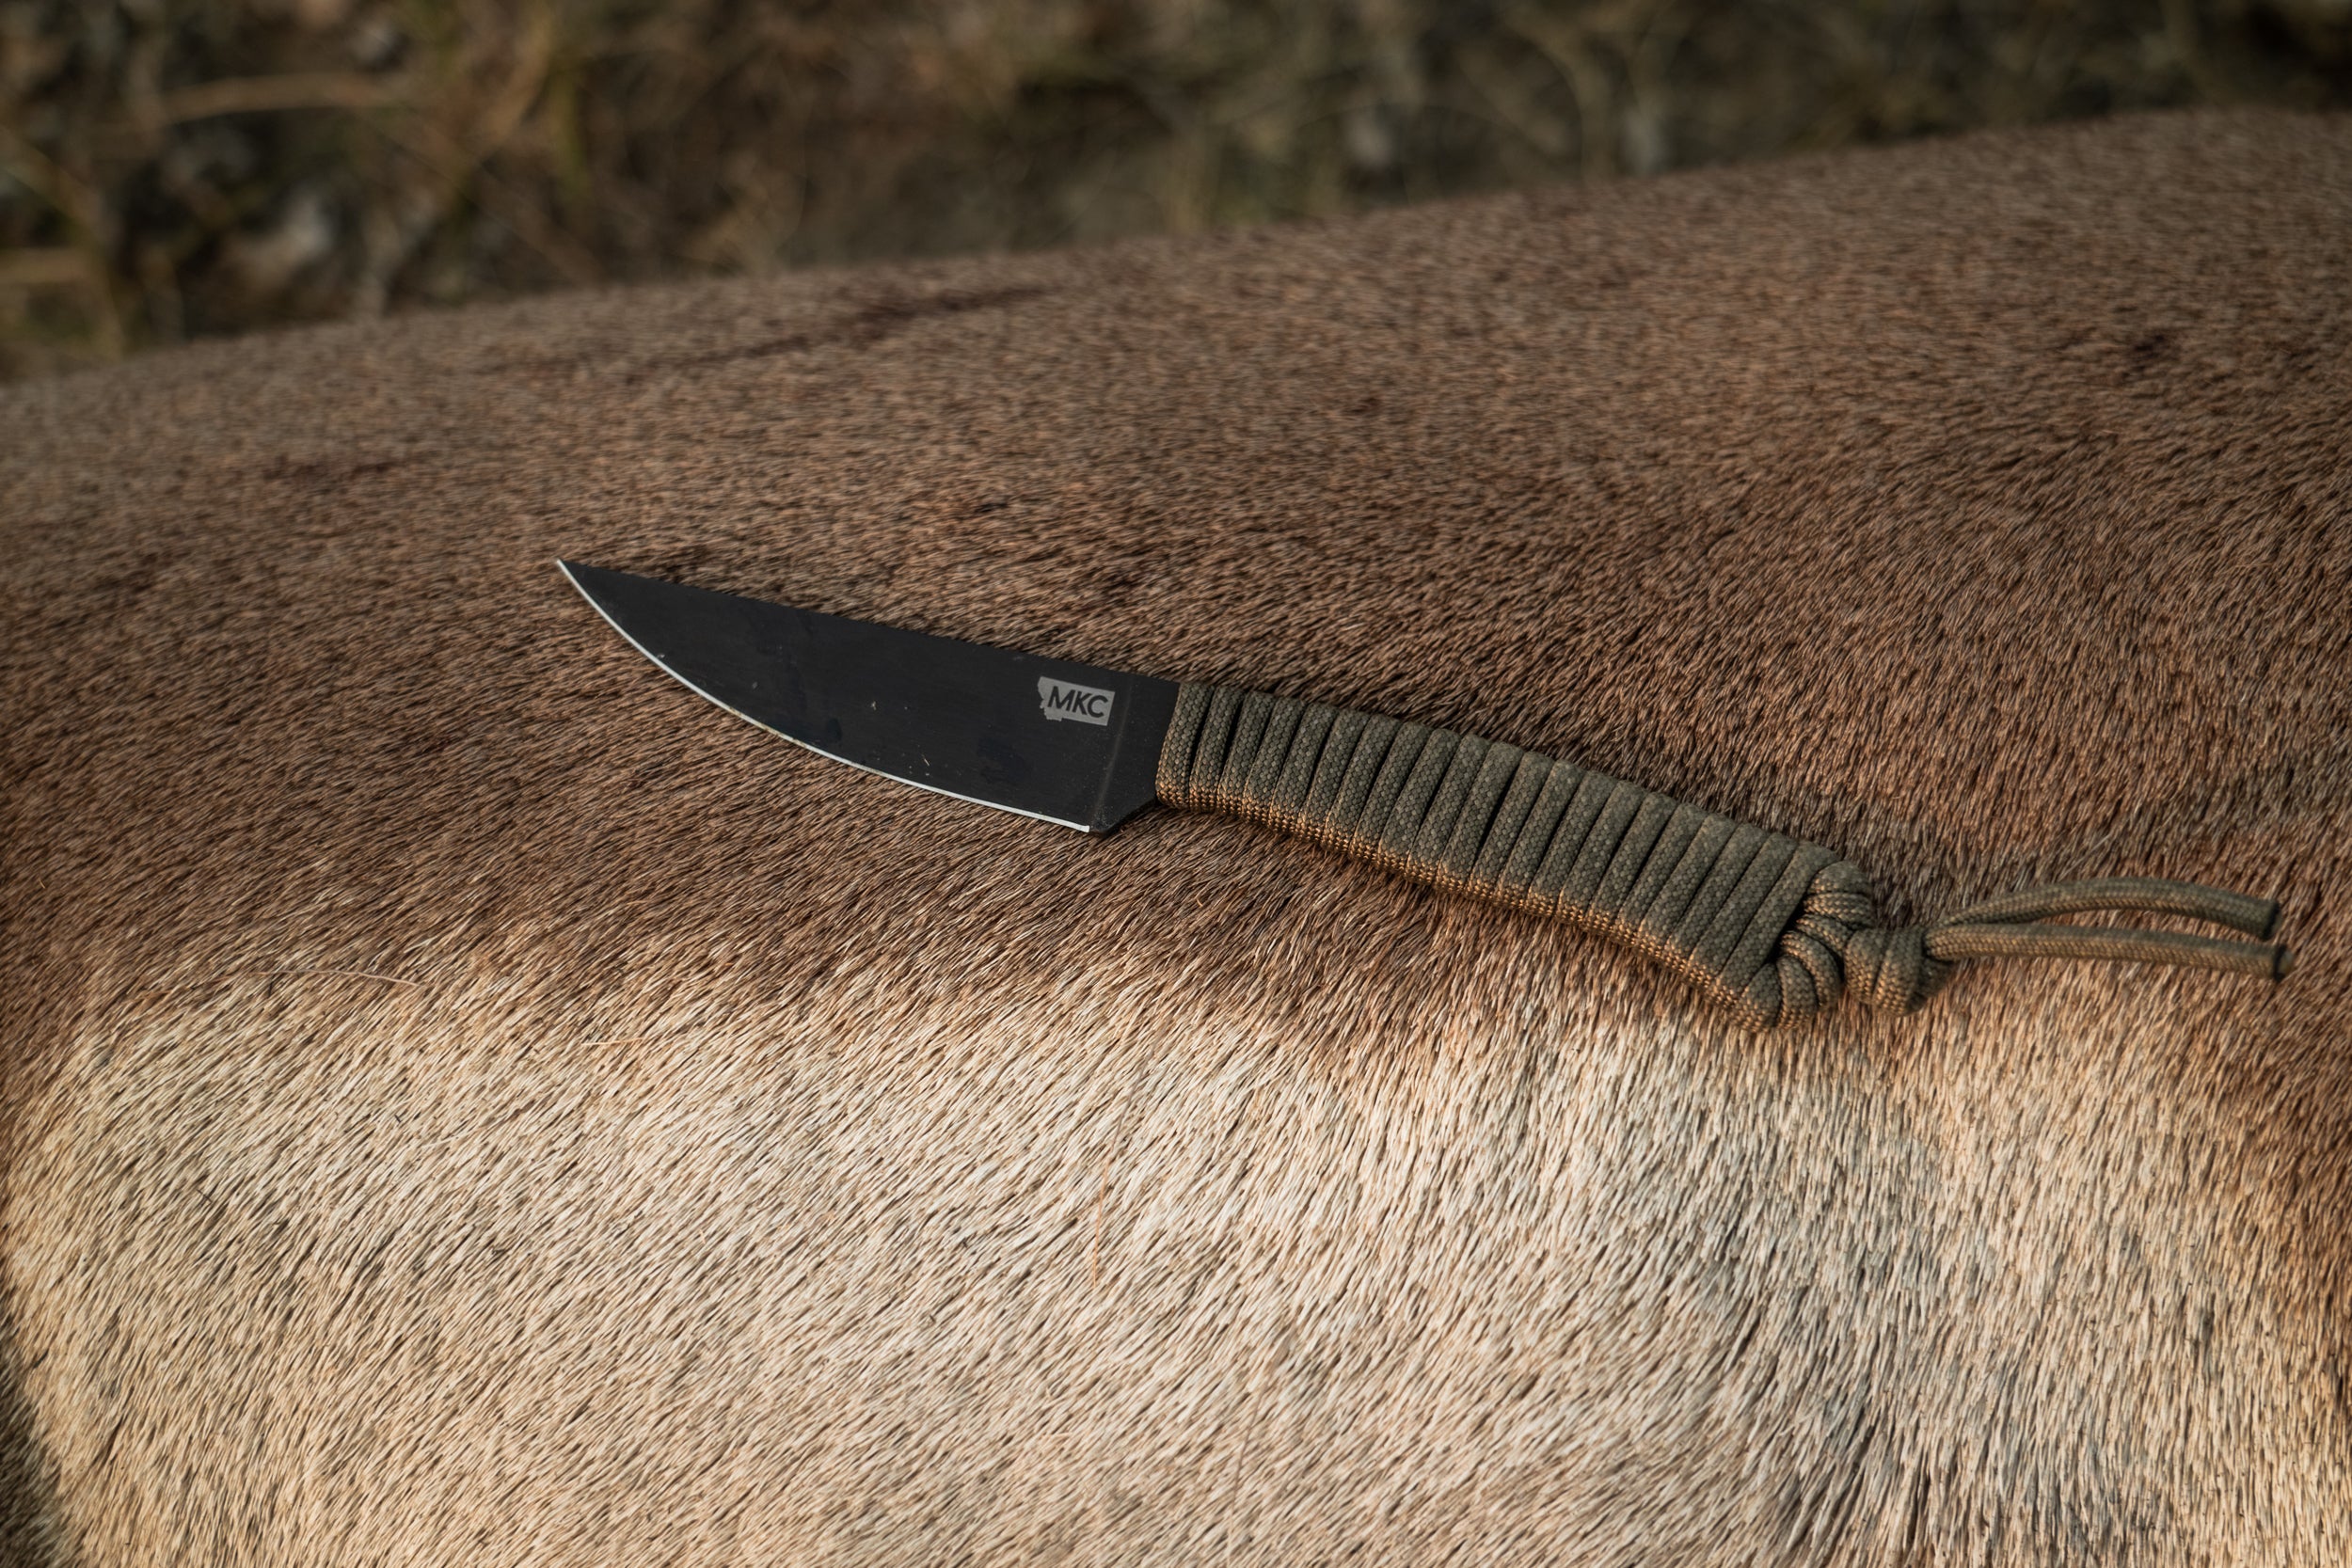 The Best Sharpener for Hunting Knives and How to Sharpen 